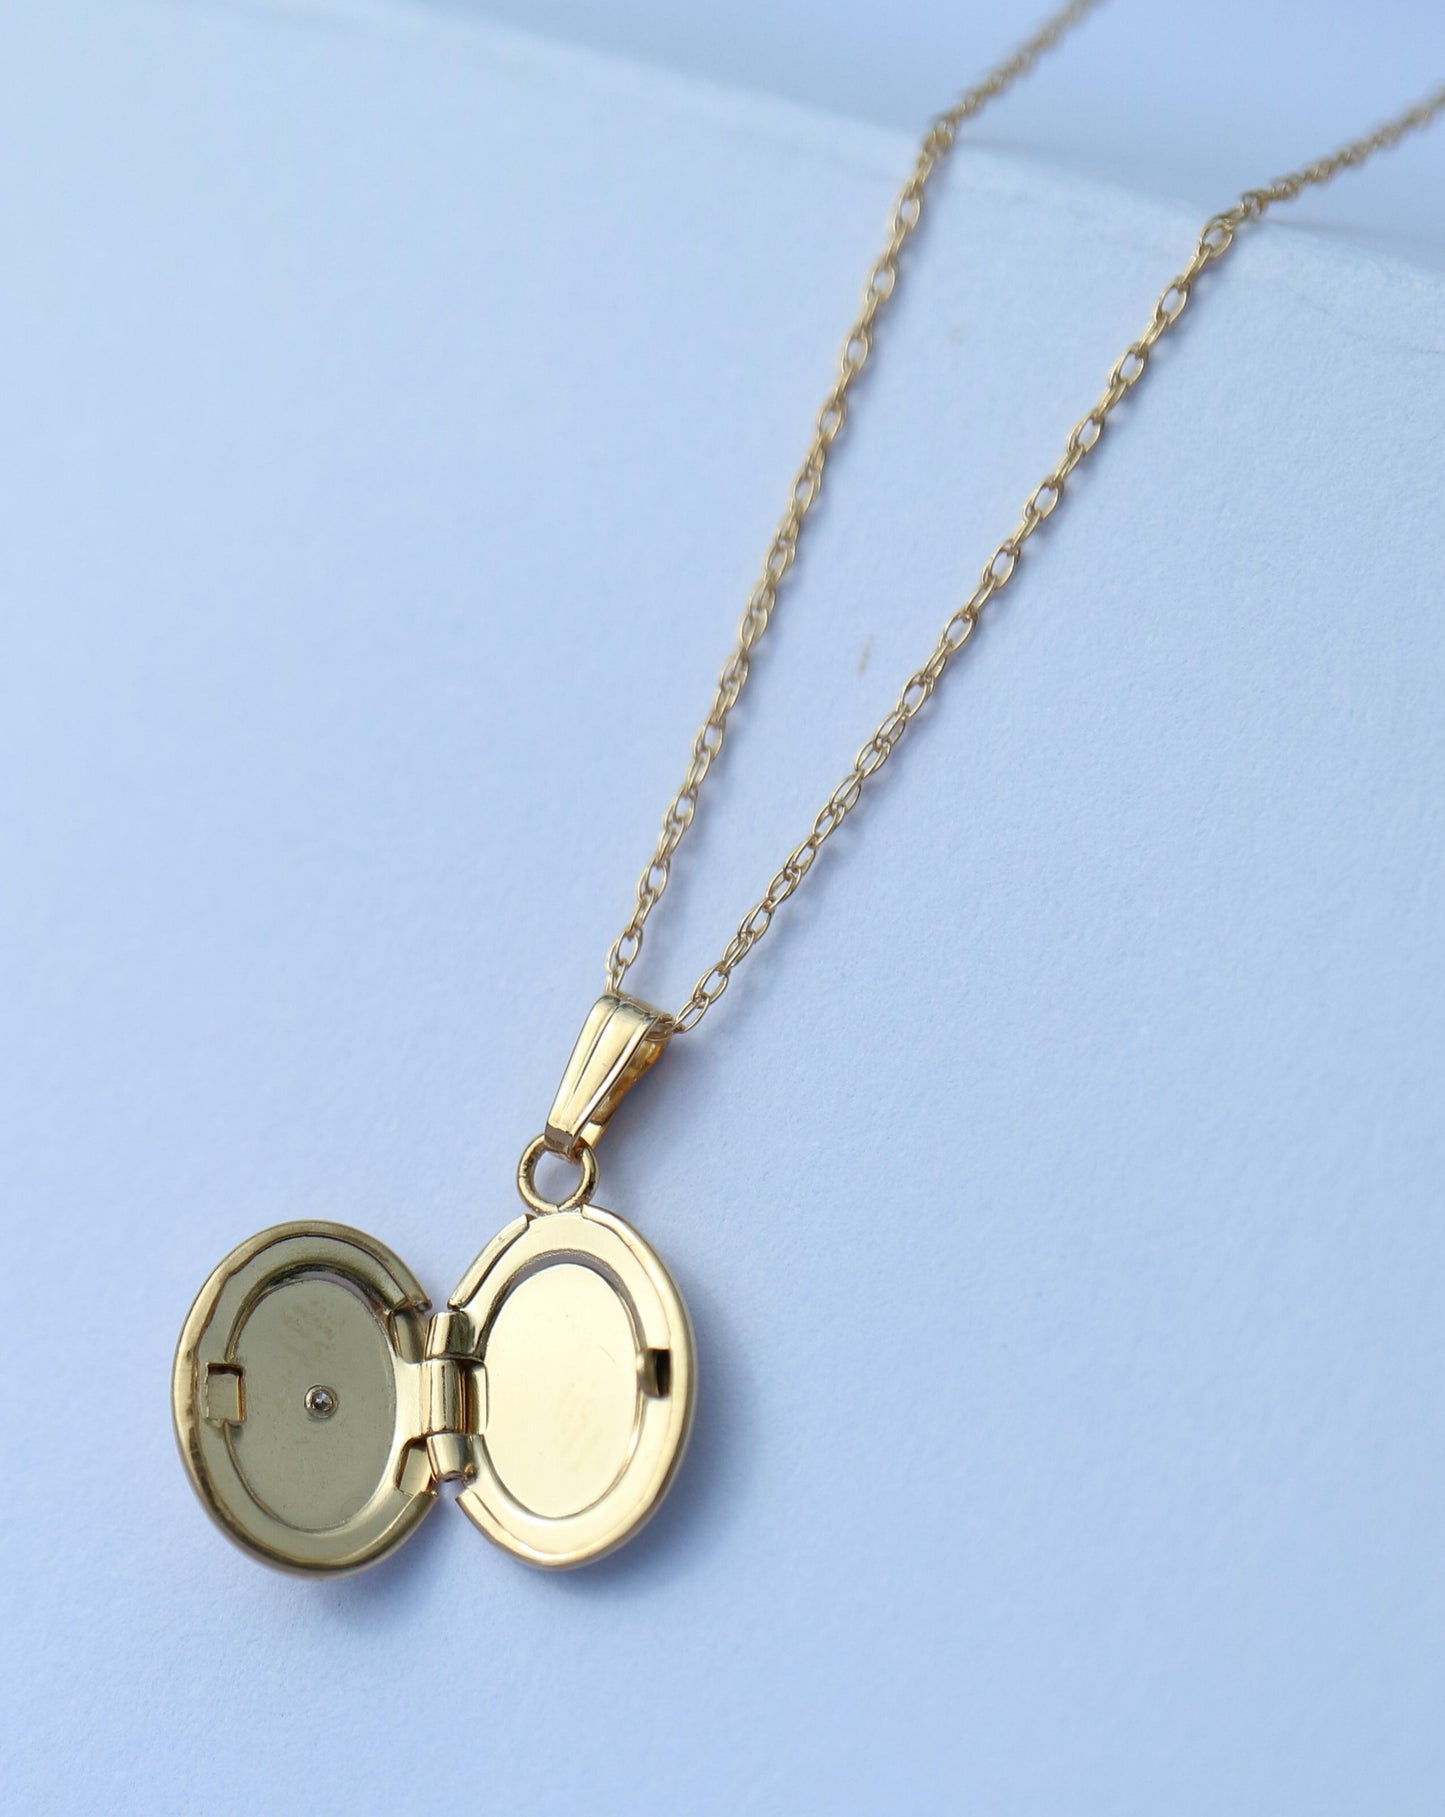 Solid 14ct gold and diamond locket from La Kaiser Jewelry